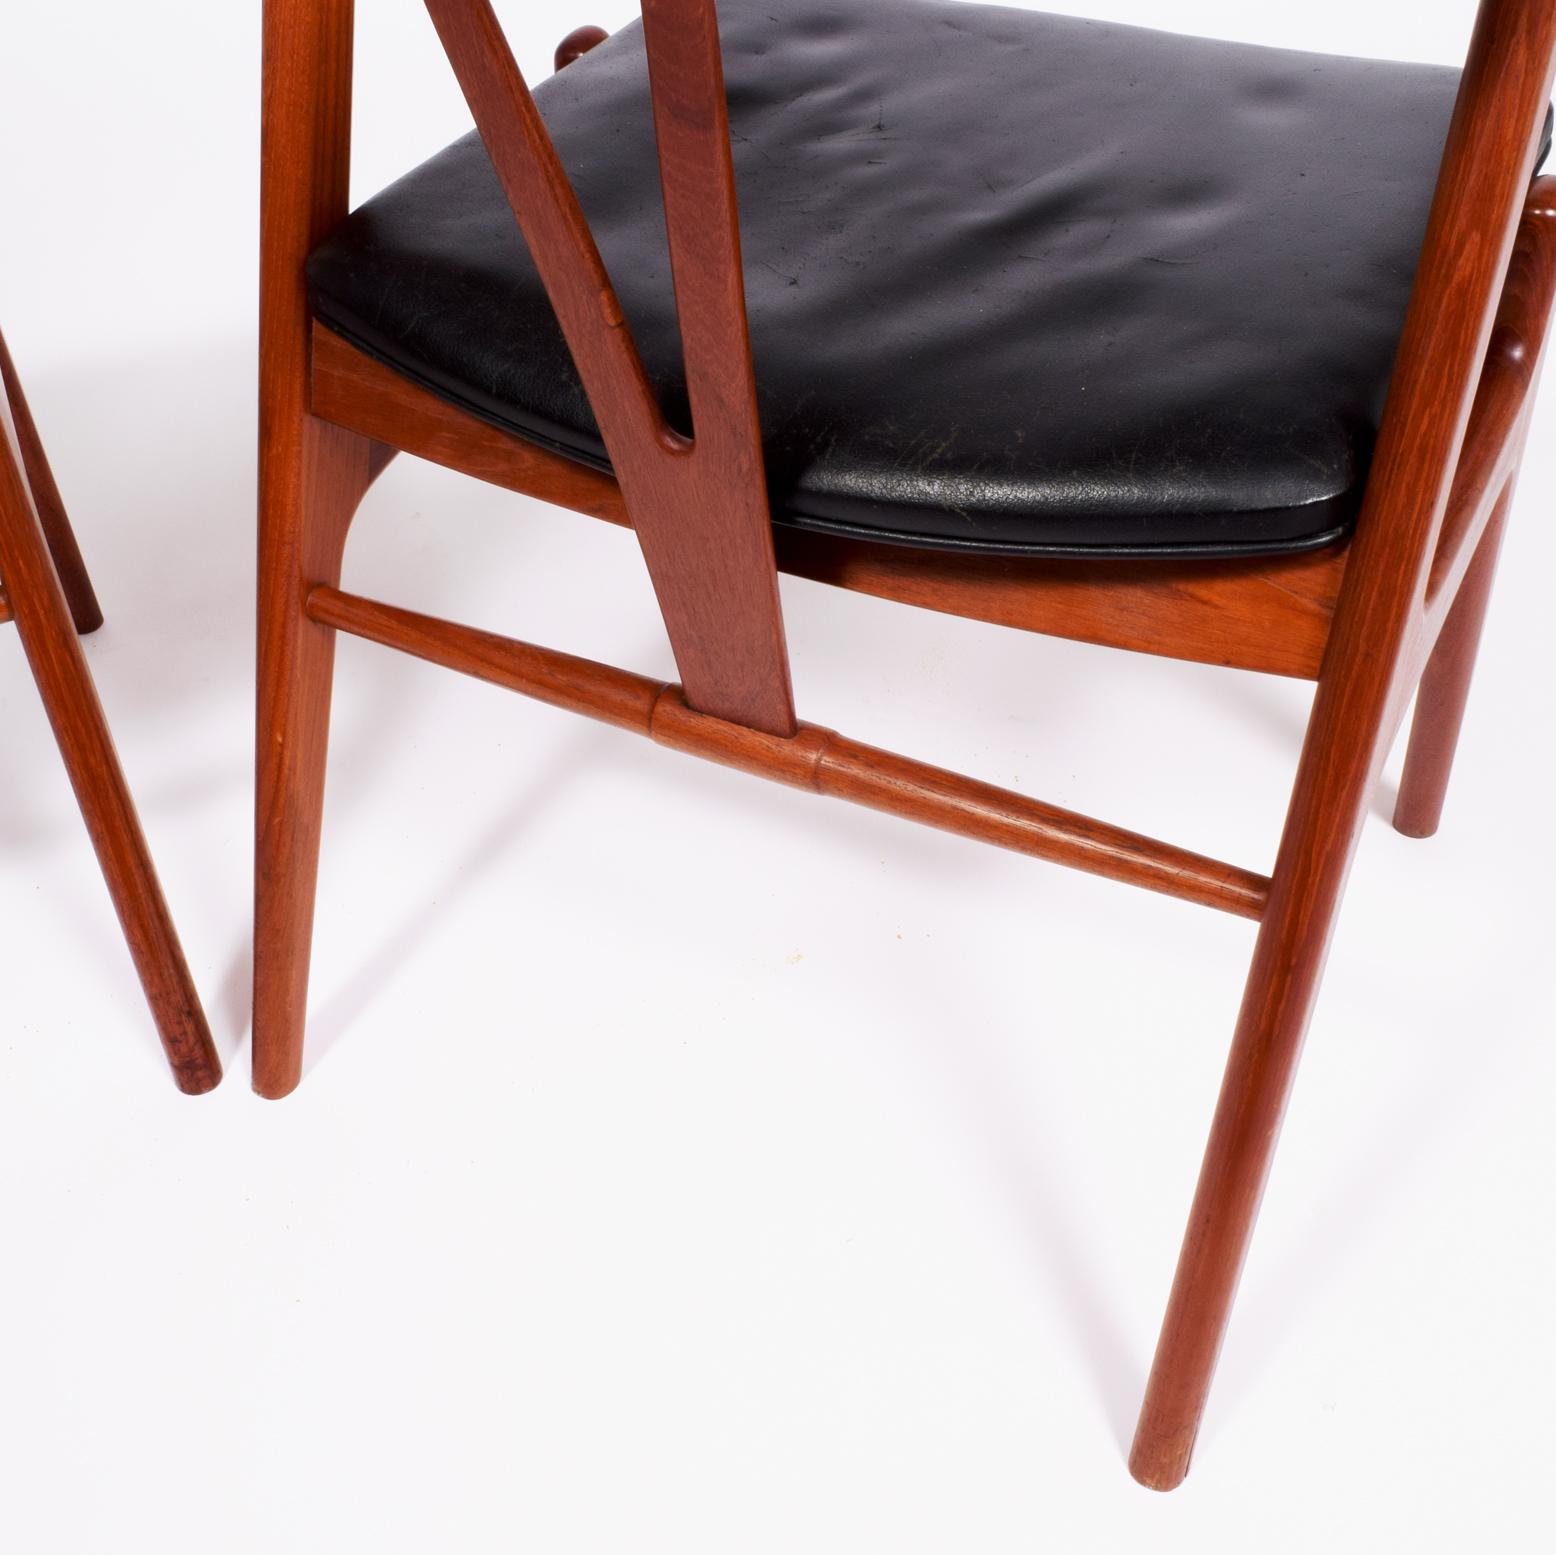 Mid-20th Century Pair of Armchairs by Torbjorn Afdal for Bruksbo